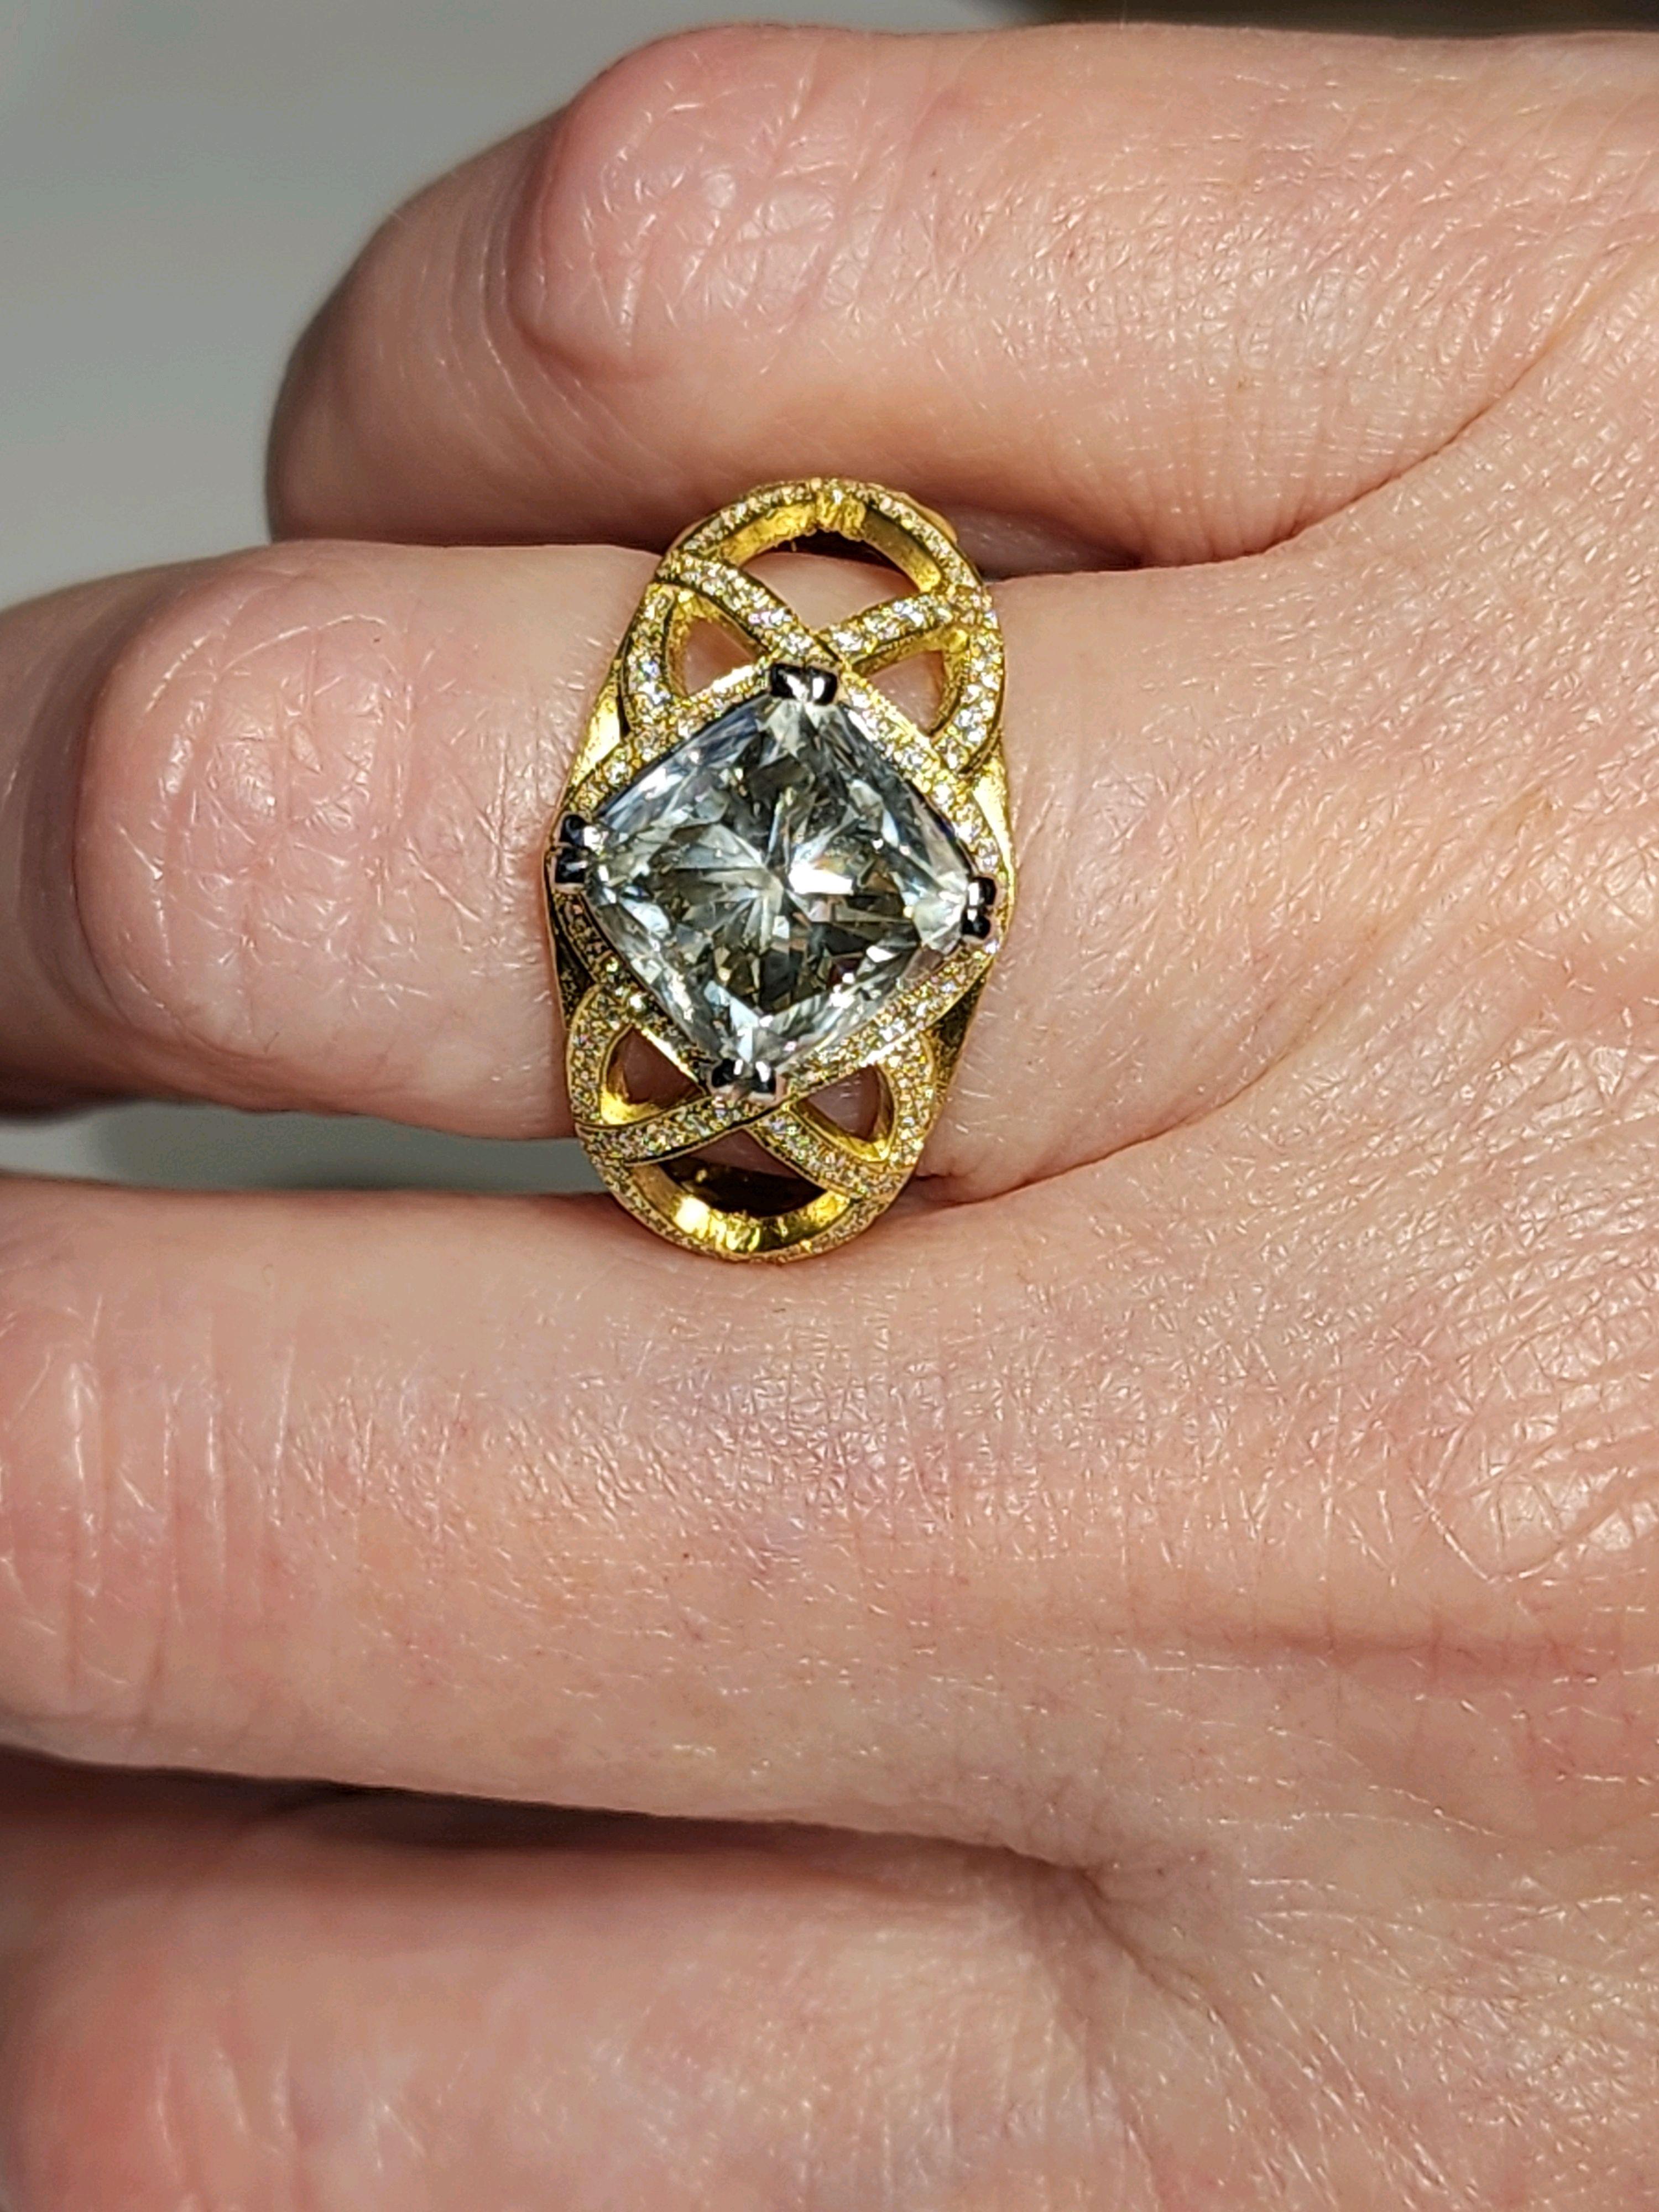 A stunning 5.12 carat diamond ring set in 18kt matte yellow gold. The Radiant Cushion-cut diamond is 4.49 carats and elicits a mirror like effect to light that is refracted within, and is complemented by the warmth of yellow gold. The center Diamond